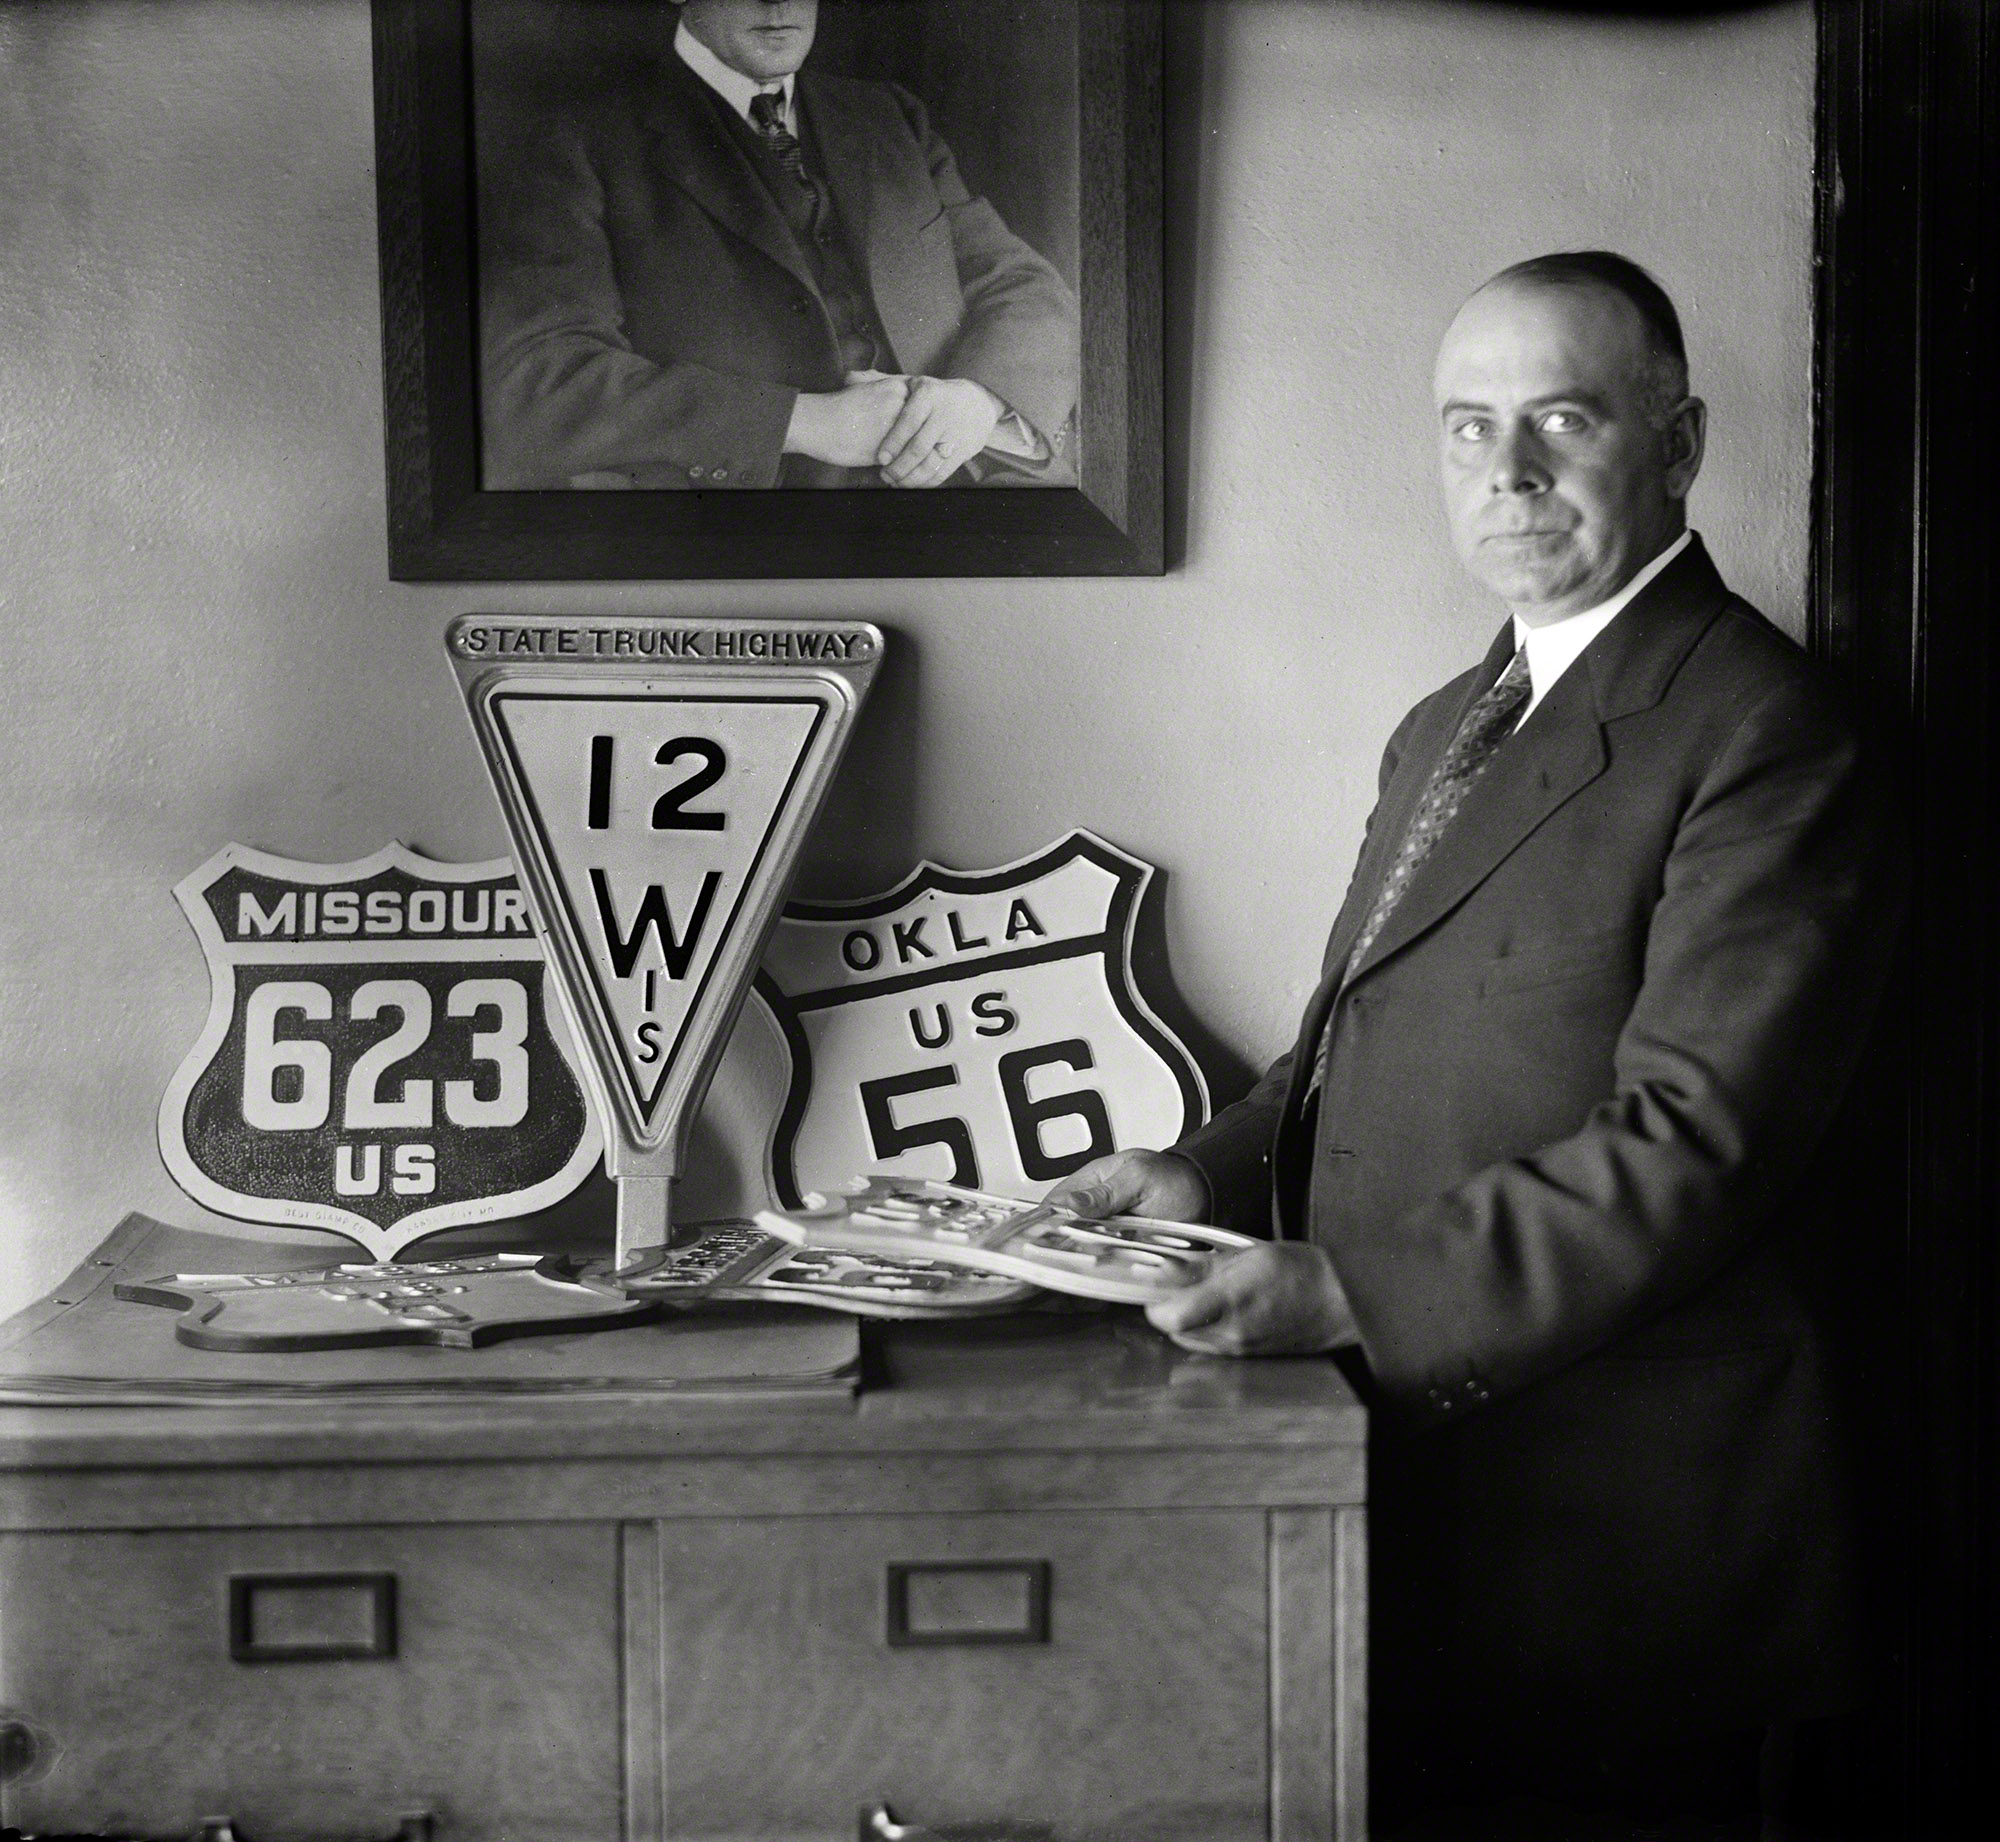 &nbsp; &nbsp; &nbsp; &nbsp; The conferees representing the highway commissions of several States, who met in this city during the present week under the auspices of the Joint Board of State and Federal Highways, reached a wise decision when they agreed to create a group of interstate roads to be known as United States highways &nbsp; . . .
 -- Washington Post editorial, April 25, 1925
Washington, D.C., 1925. "No caption (man with highway signs)." Early waypoints on the road to uniform route designations and the standardization of highway signs. Harris & Ewing Collection glass negative. View full size.